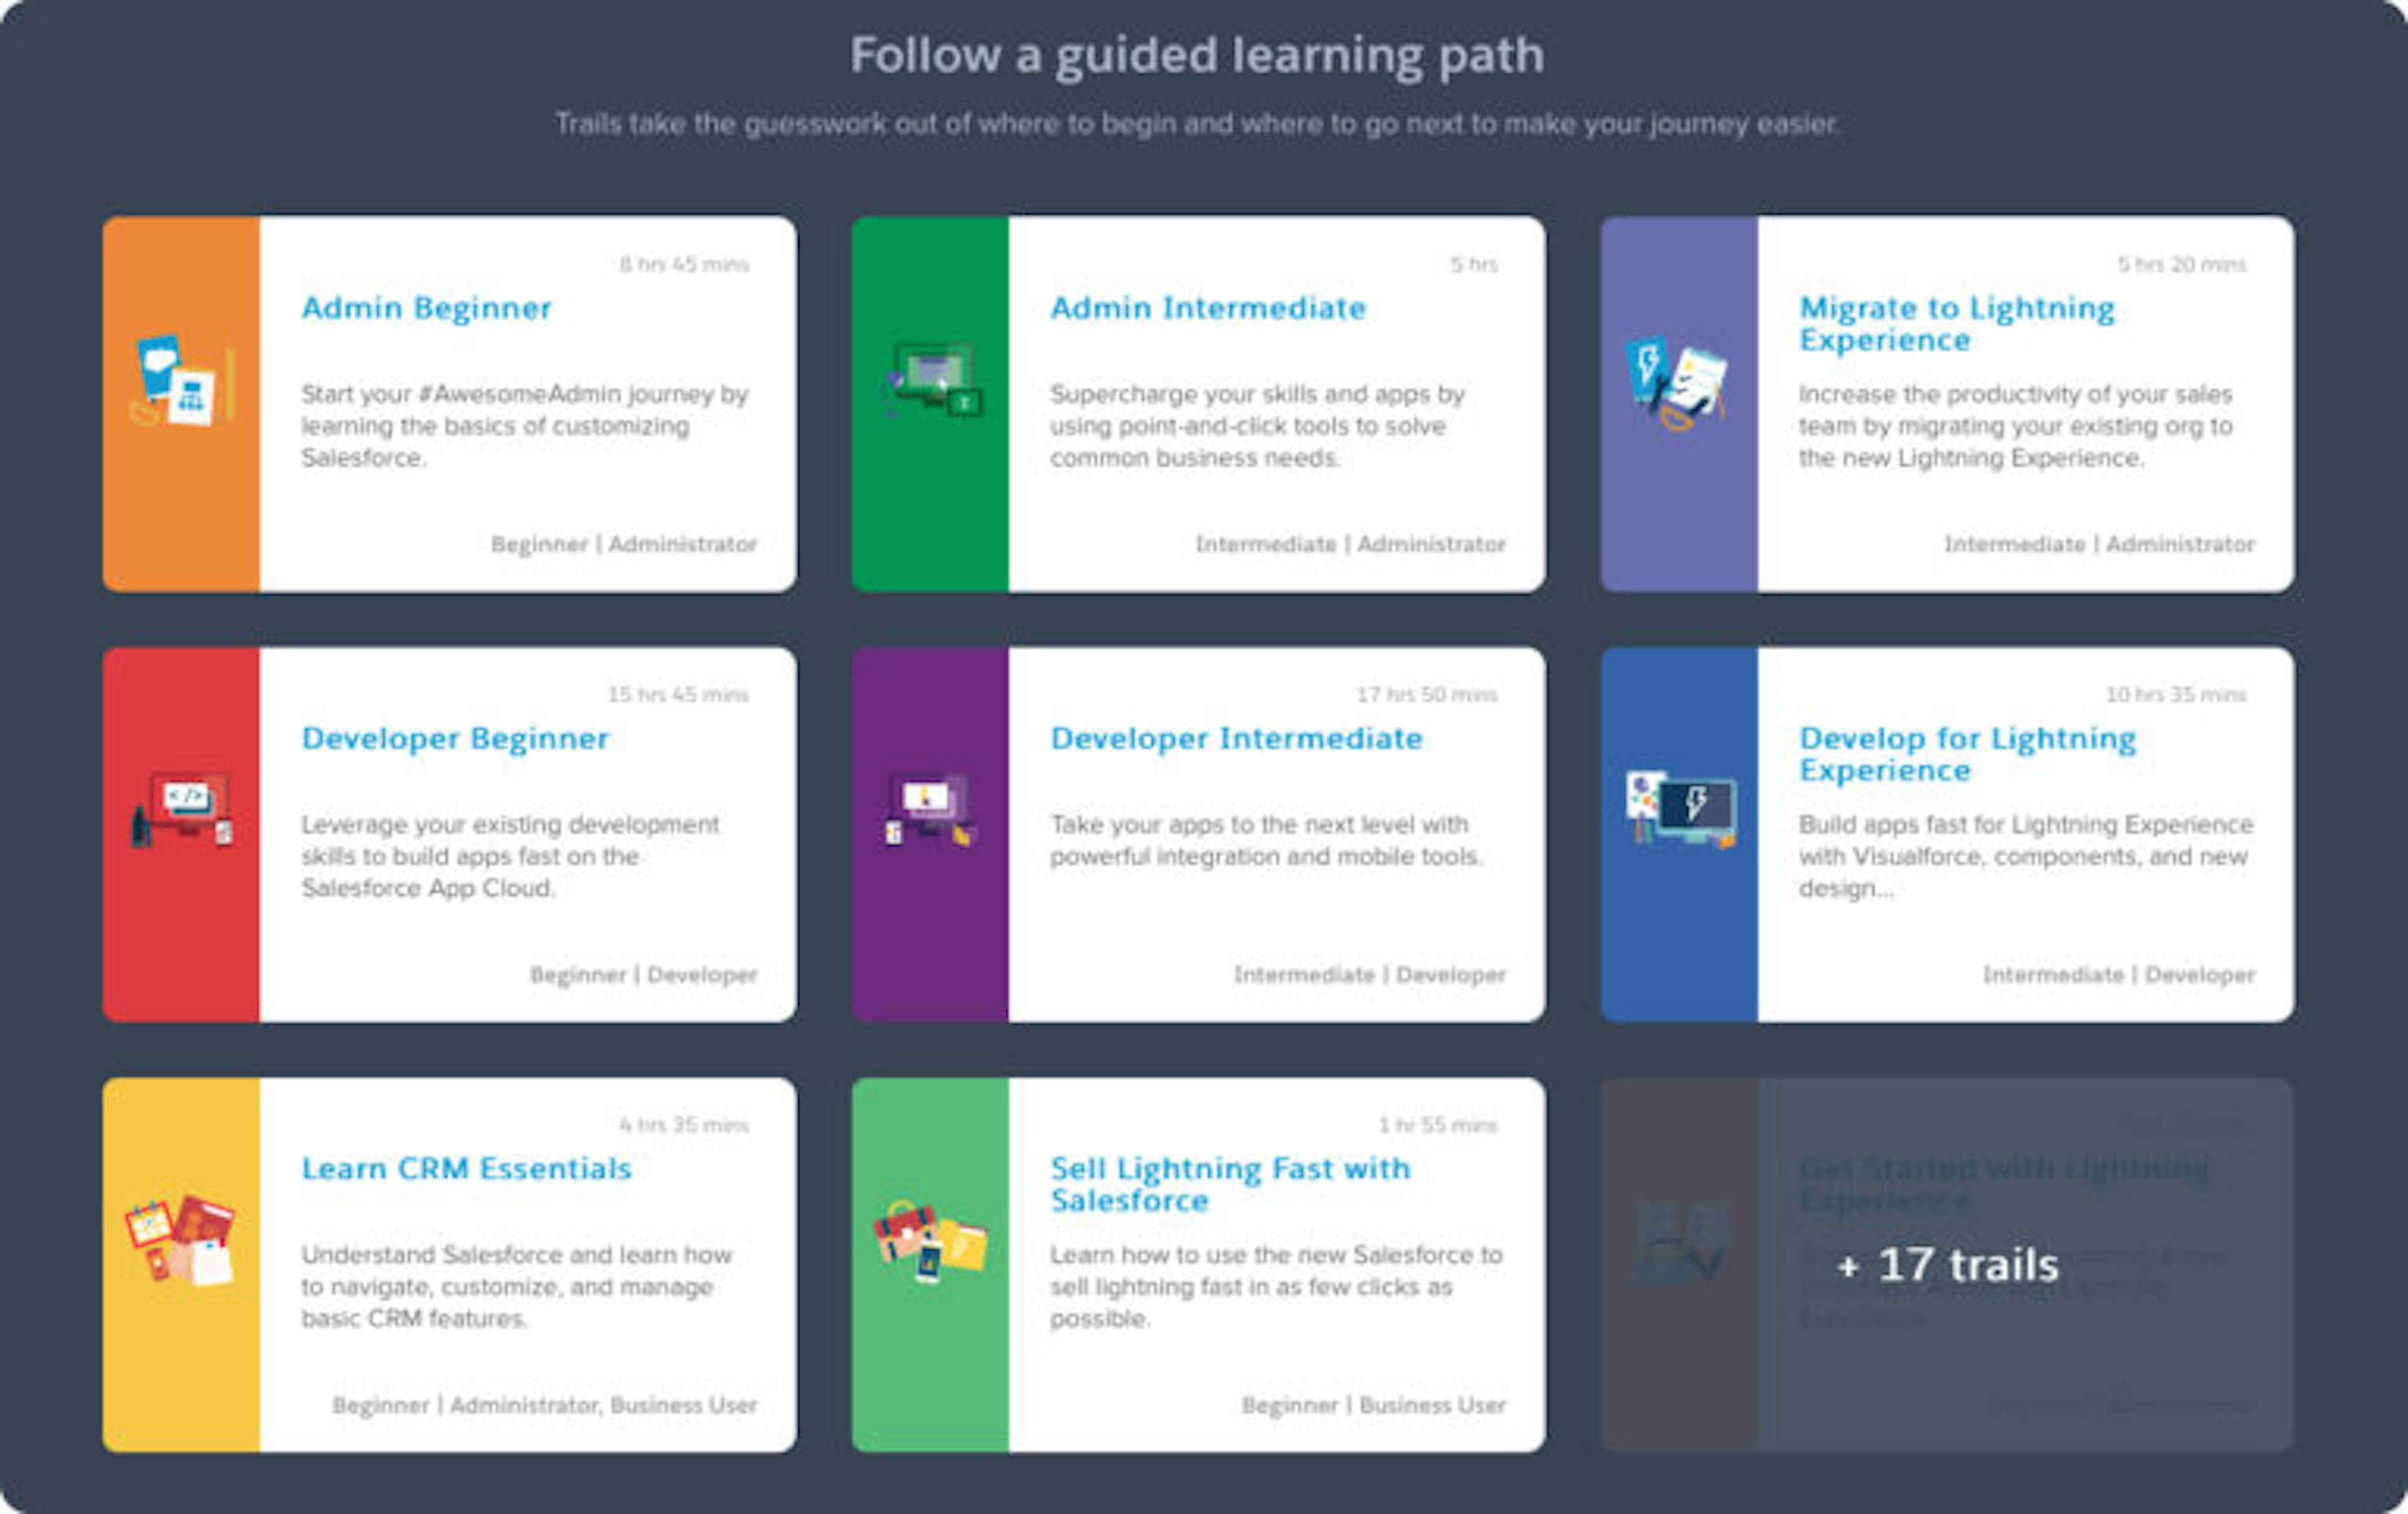 Learning path